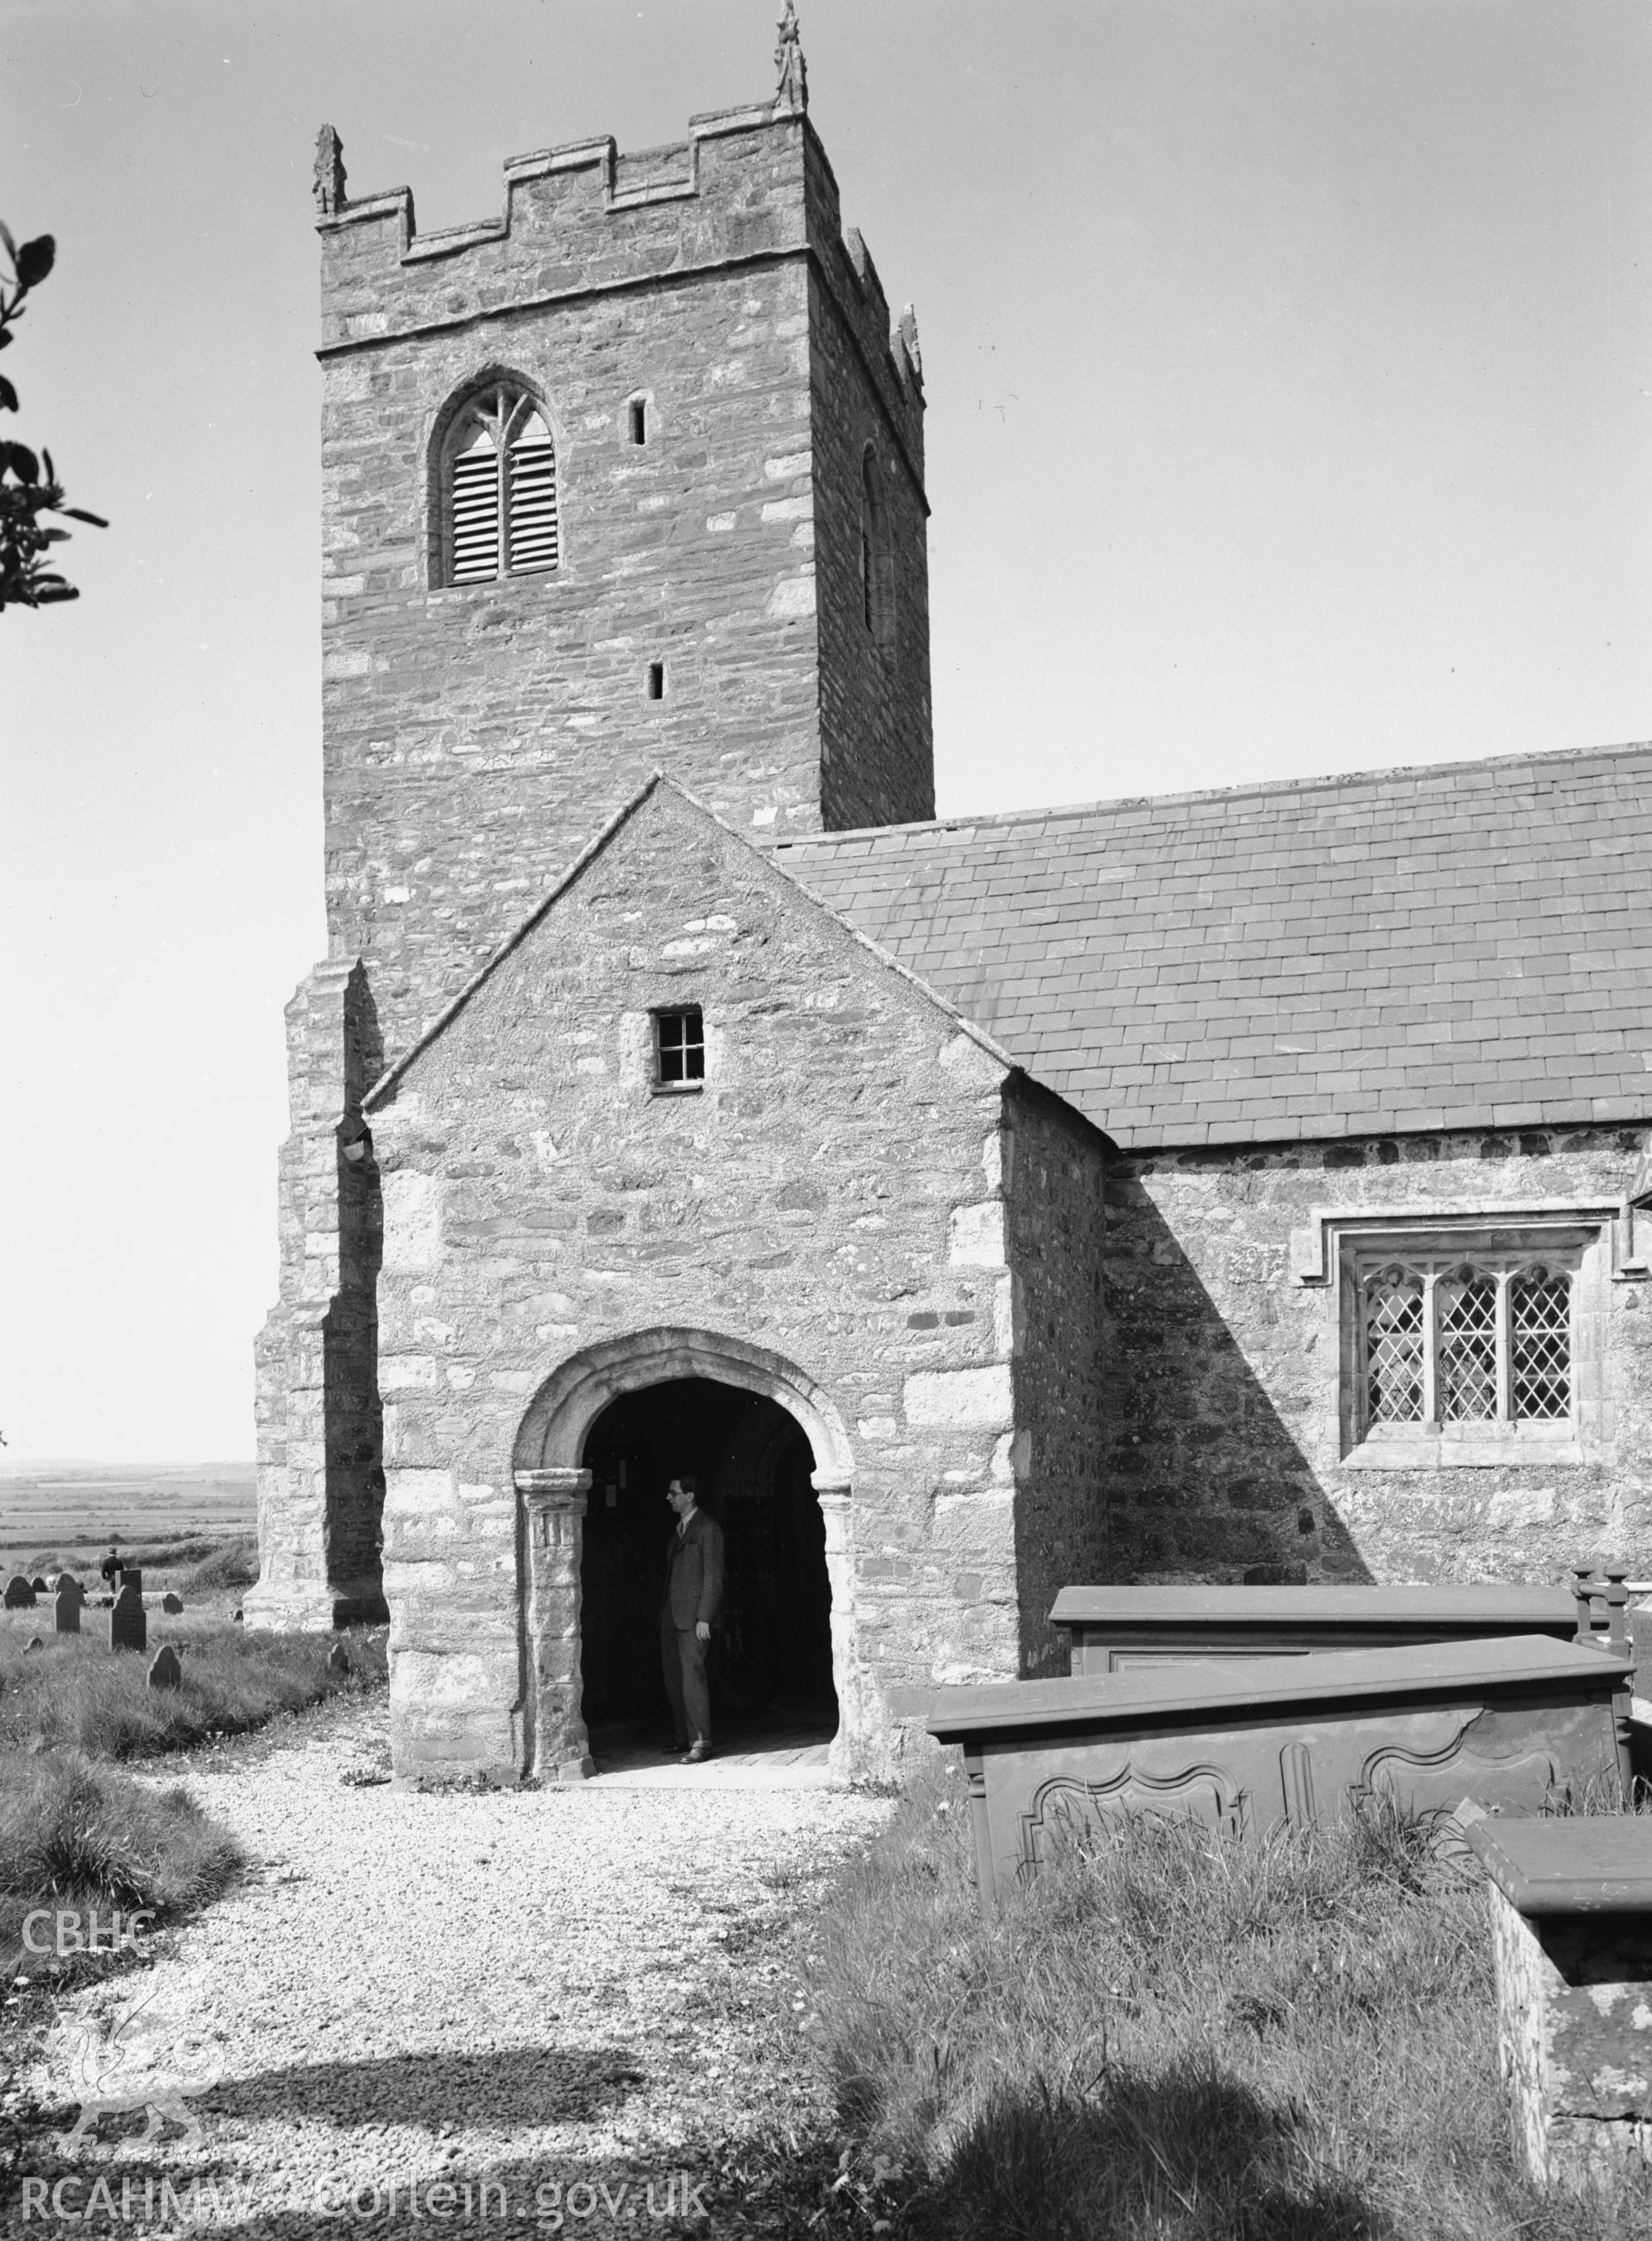 Exterior view showing the south porch and the tower.